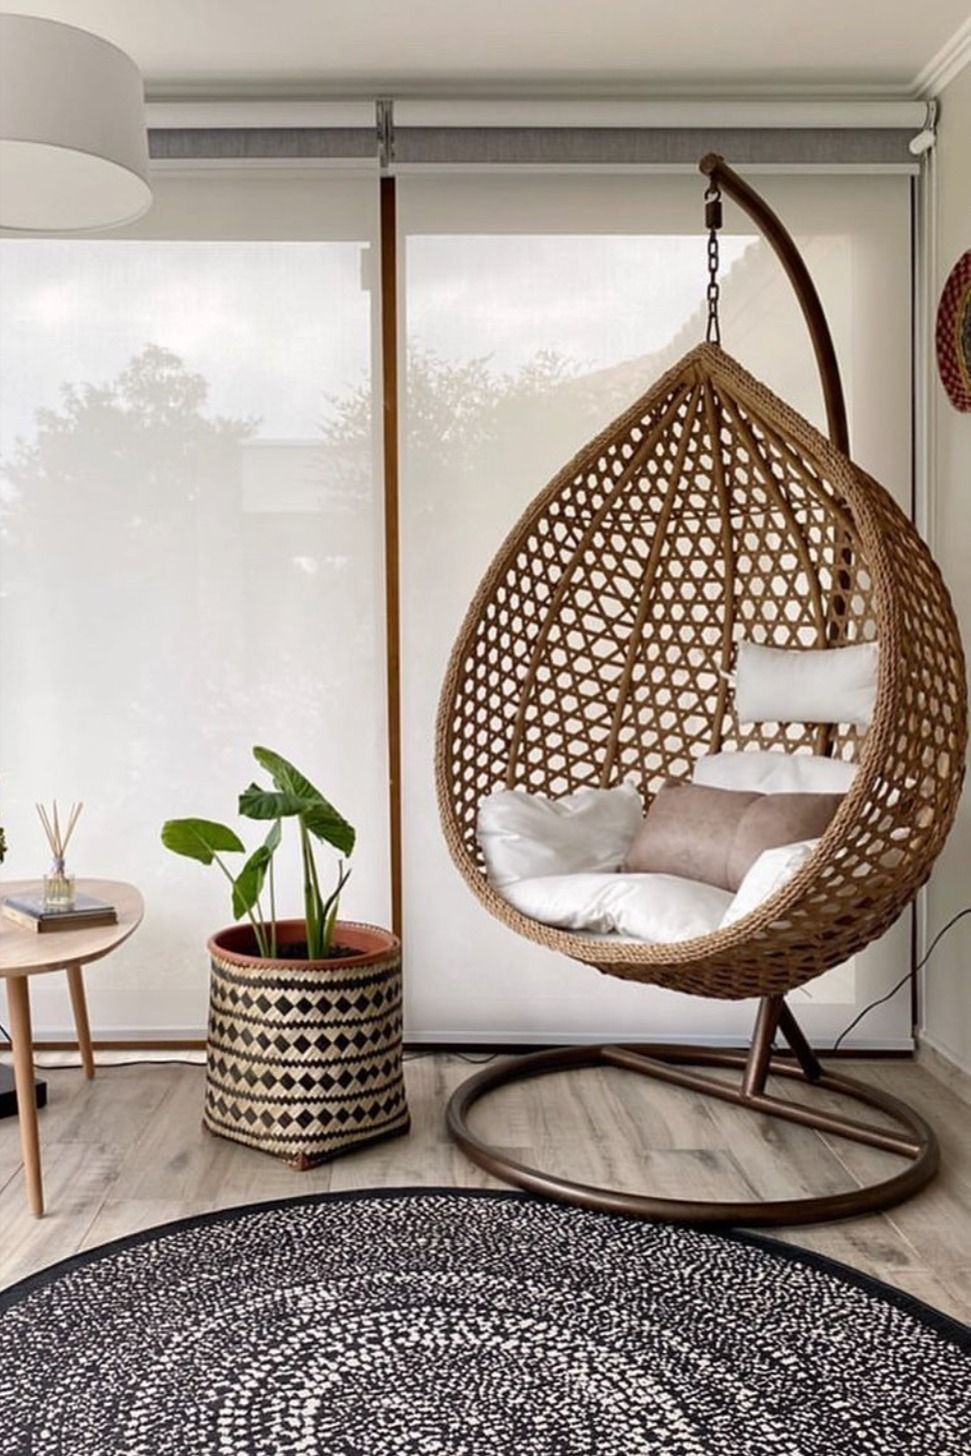 Hanging Chairs: Swinging into Relaxation with Modern Style